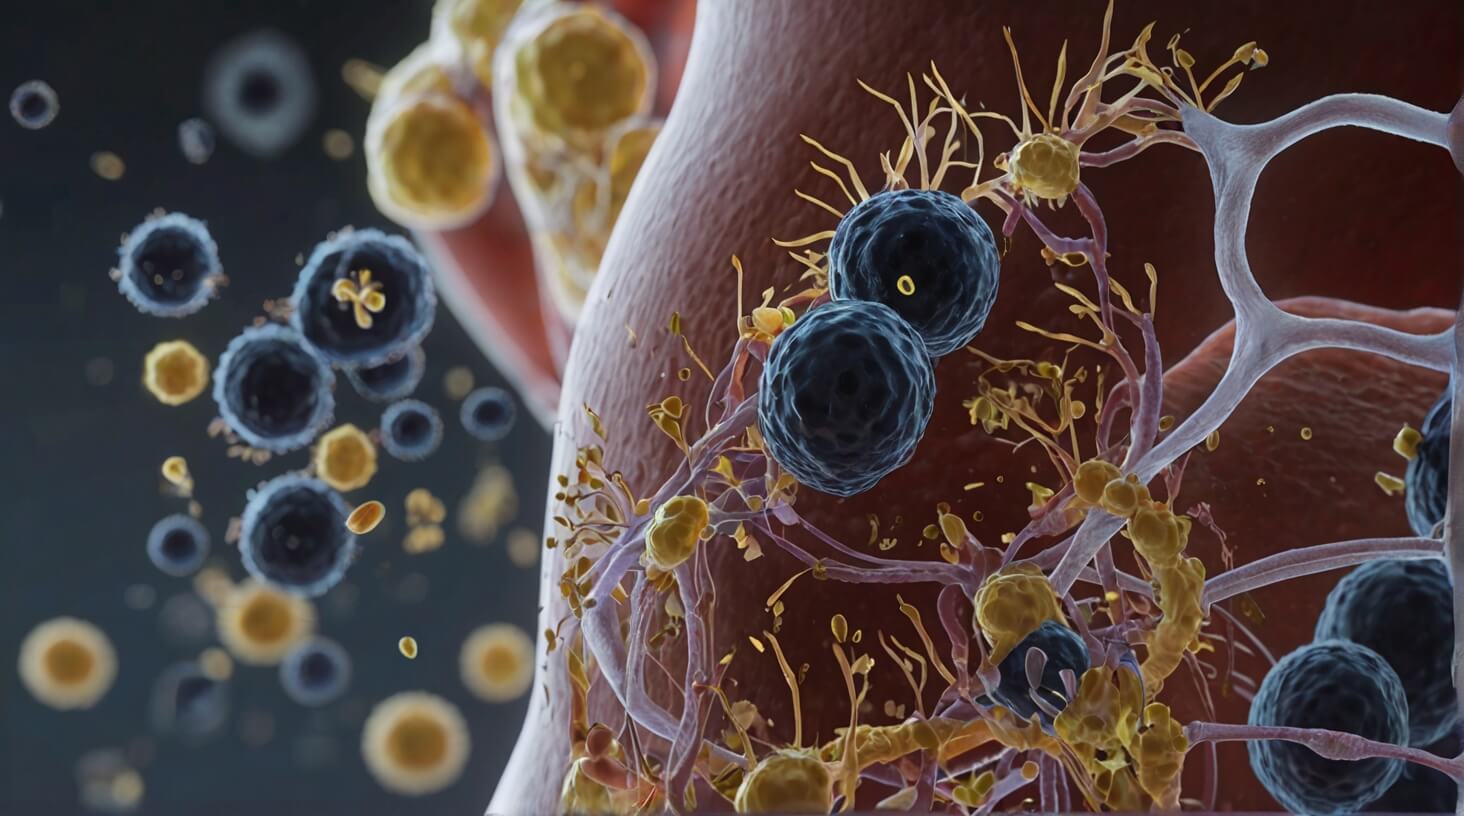 An illustration depicting the fundamental workings of the immune system, showcasing its intricate defense mechanisms and biological processes.